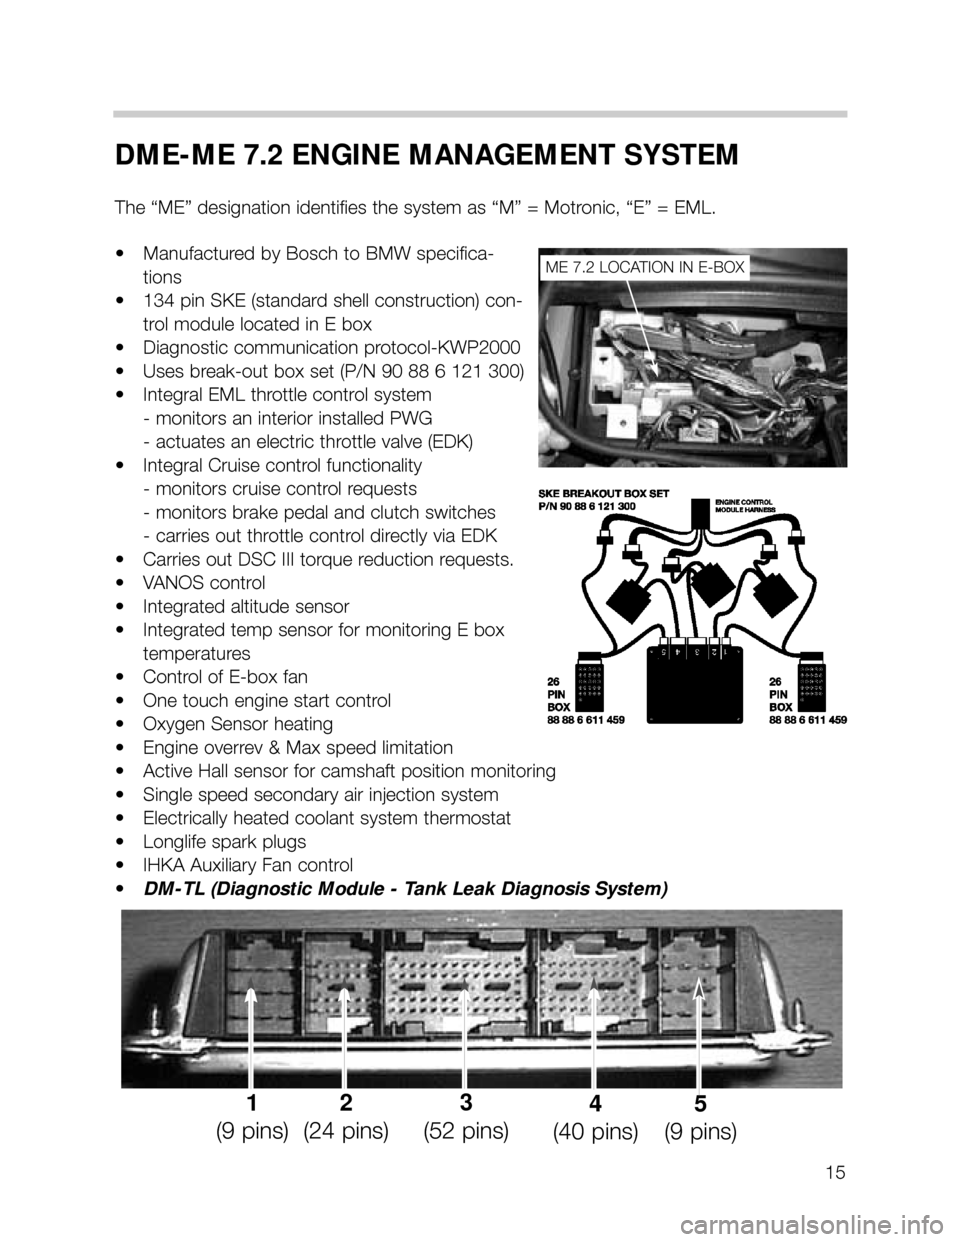 BMW X5 2003 E53 M62TU Engine Workshop Manual 15
DME-ME 7.2 ENGINE MANAGEMENT SYSTEM
The “ME” designation identifies the system as “M” = Motronic, “E” = EML.
• Manufactured by Bosch to BMW specifica-
tions
• 134 pin SKE (standard 